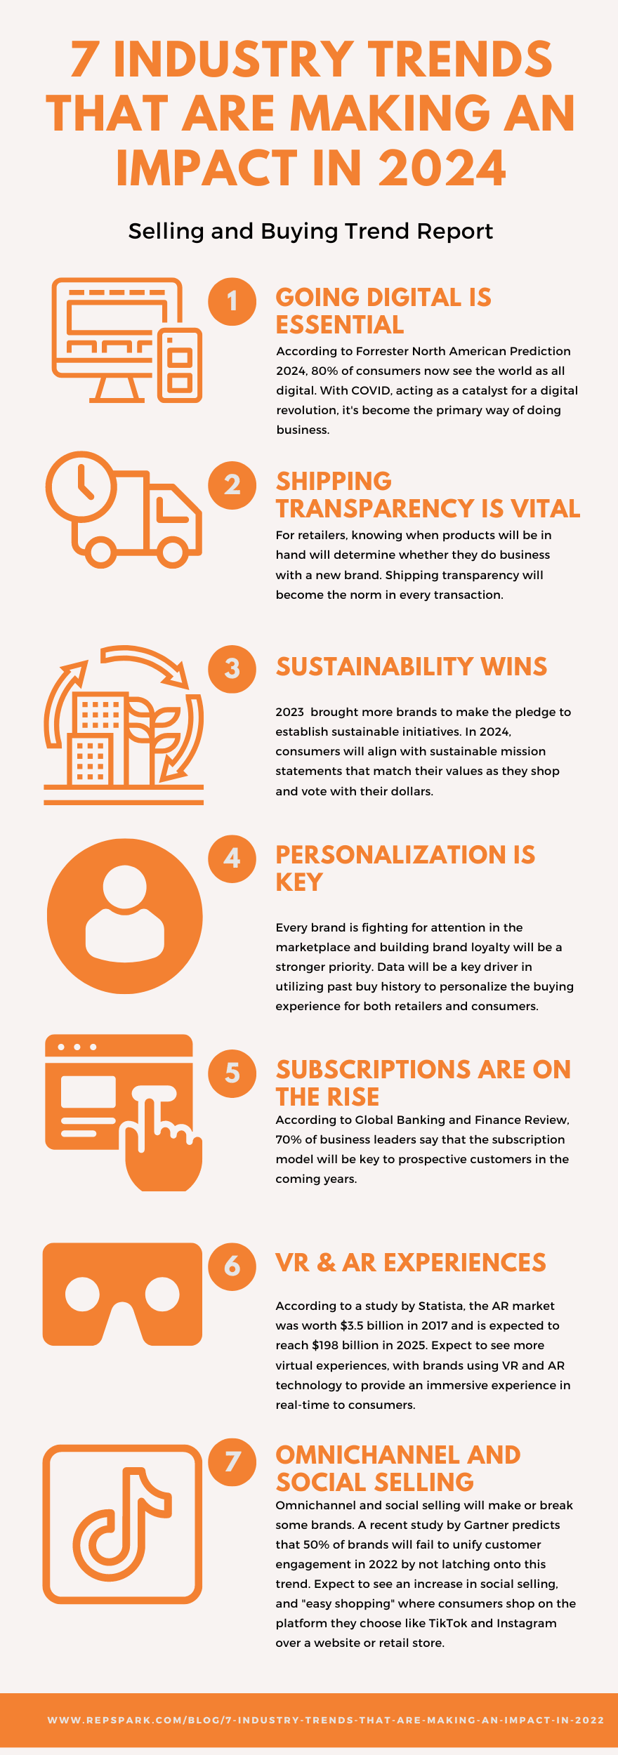 Graphic for the RepSpark Blog, 7 Industry Trends That Are Making An Impact In 2024: going digital is essential, shipping transparency is vital, sustainability wins, personalization is key, subscriptions are on the rise, vr & ar experiences, omnichannel and social selling.